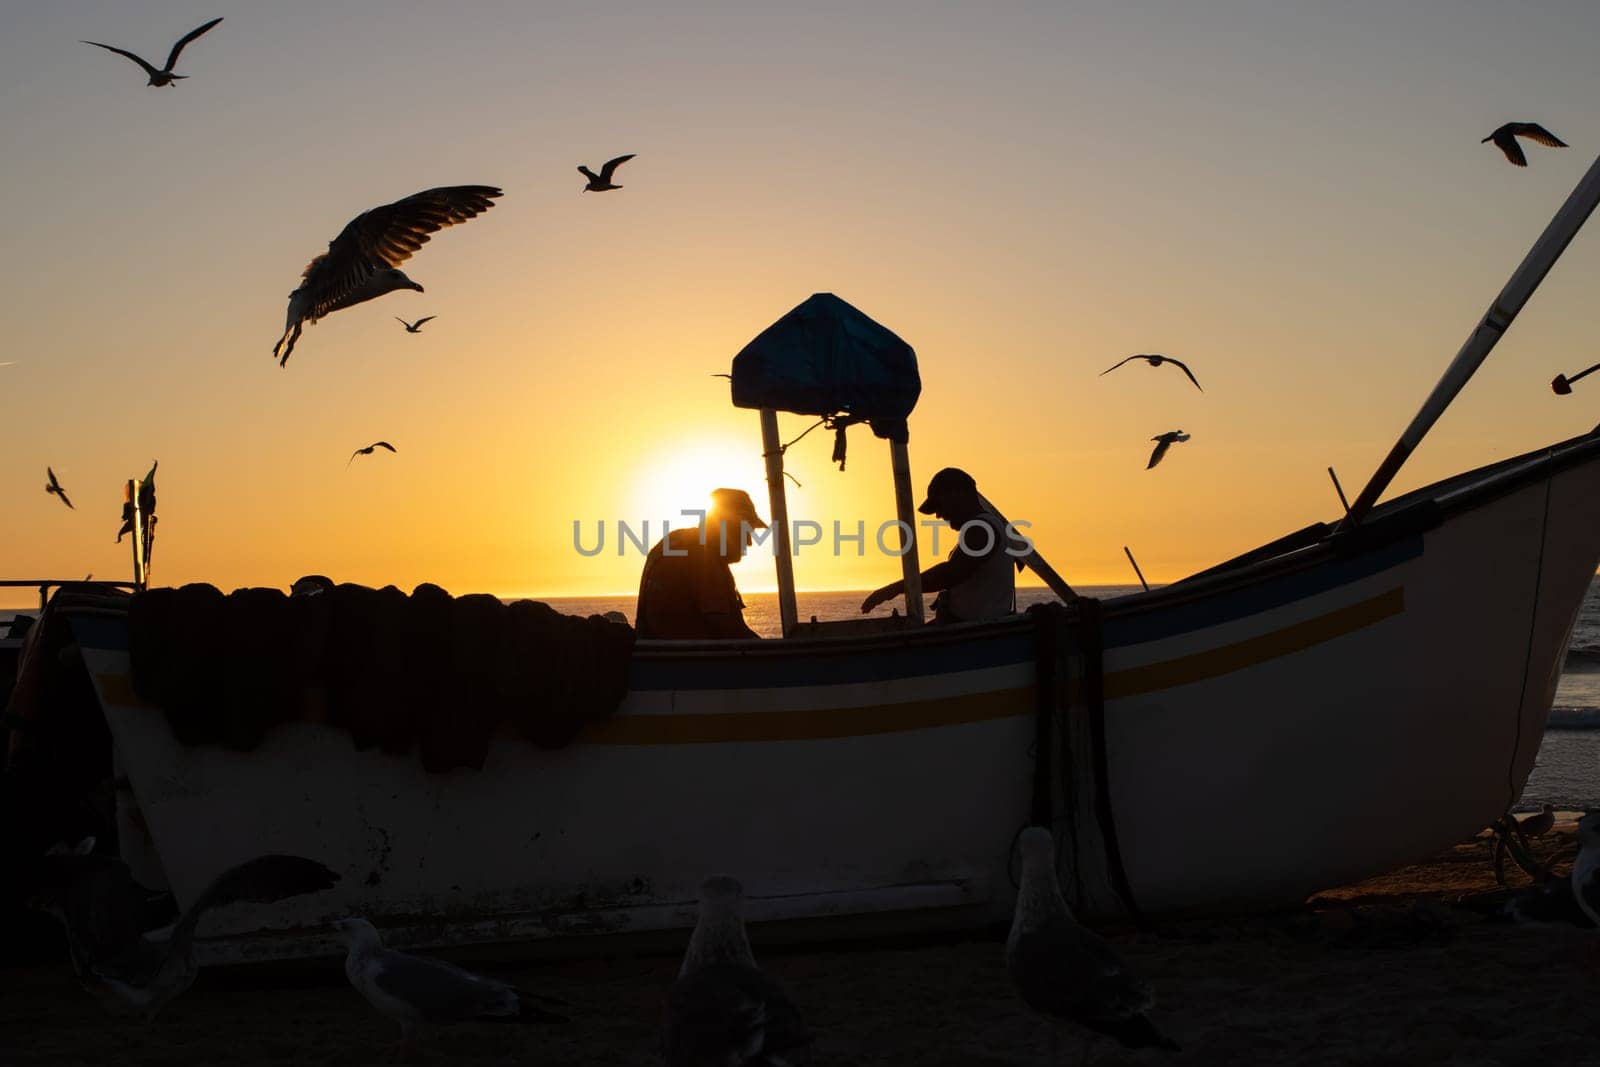 Fishermen sit in a fishing boat on the shore at sunset and seagulls fly around them by Studia72